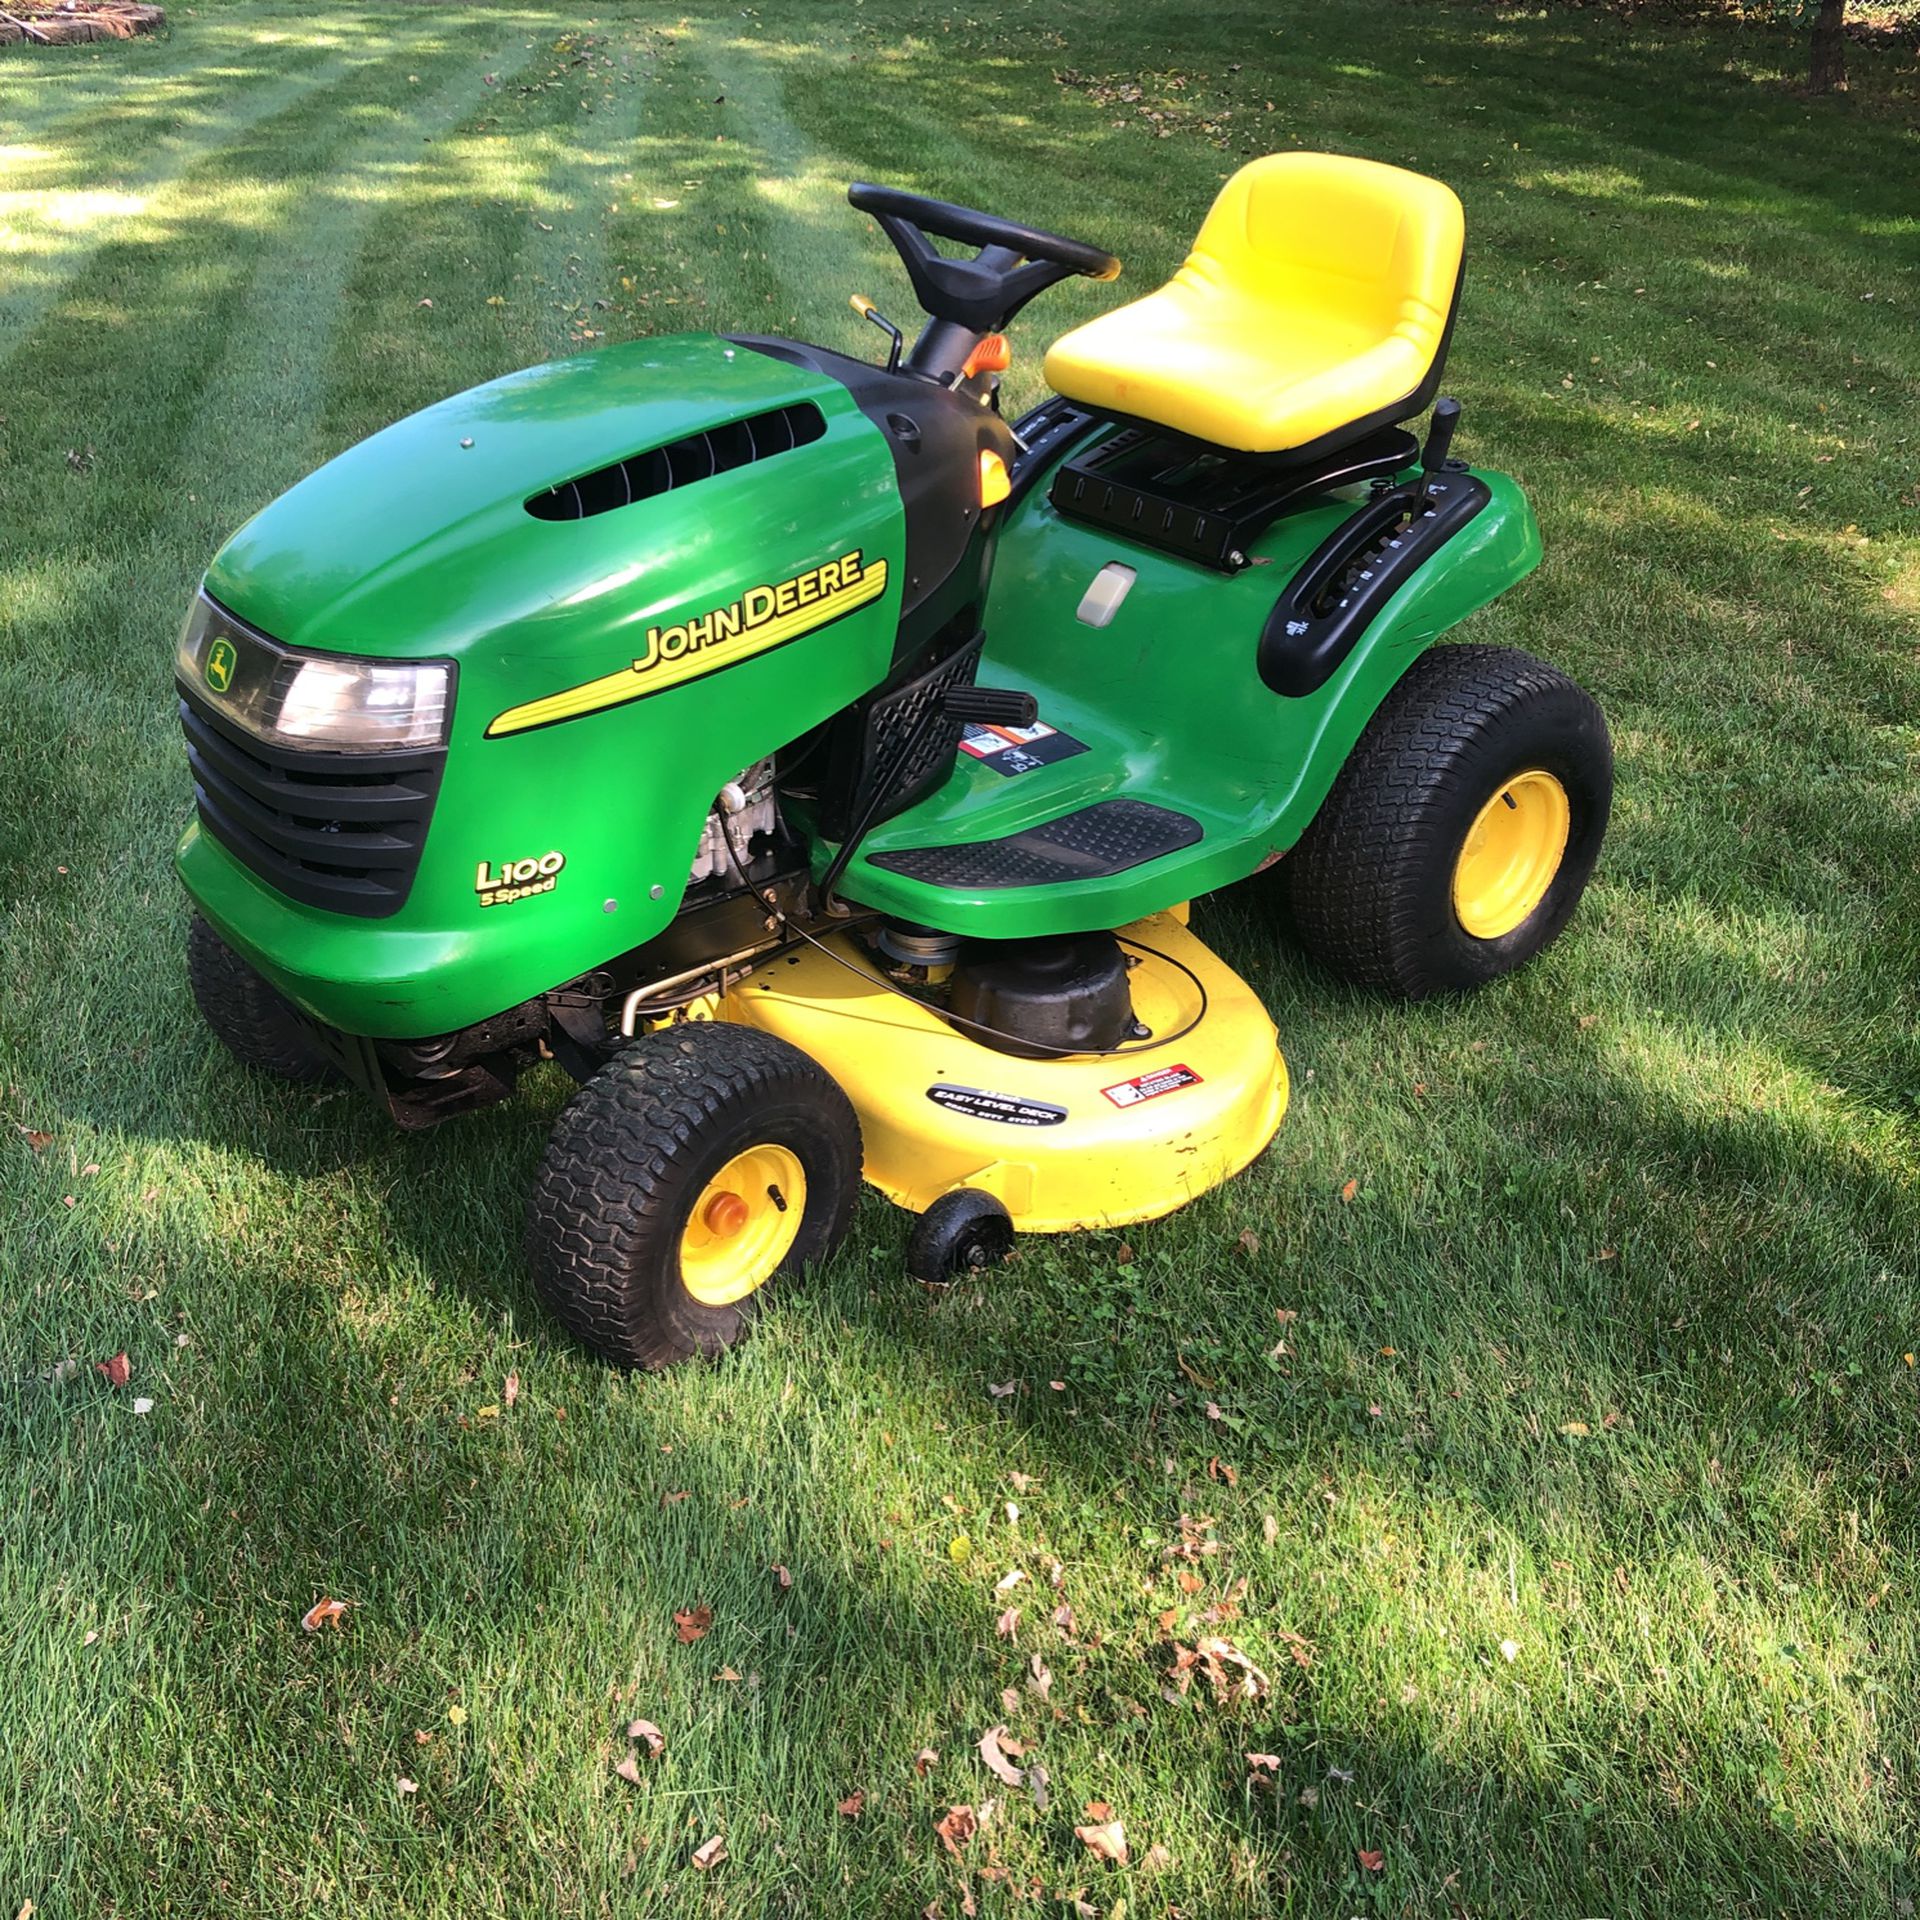 John Deere Lawnmower, Tractor Five Speed L 100 Brand New Motor Brand New Seat And Brand New Battery